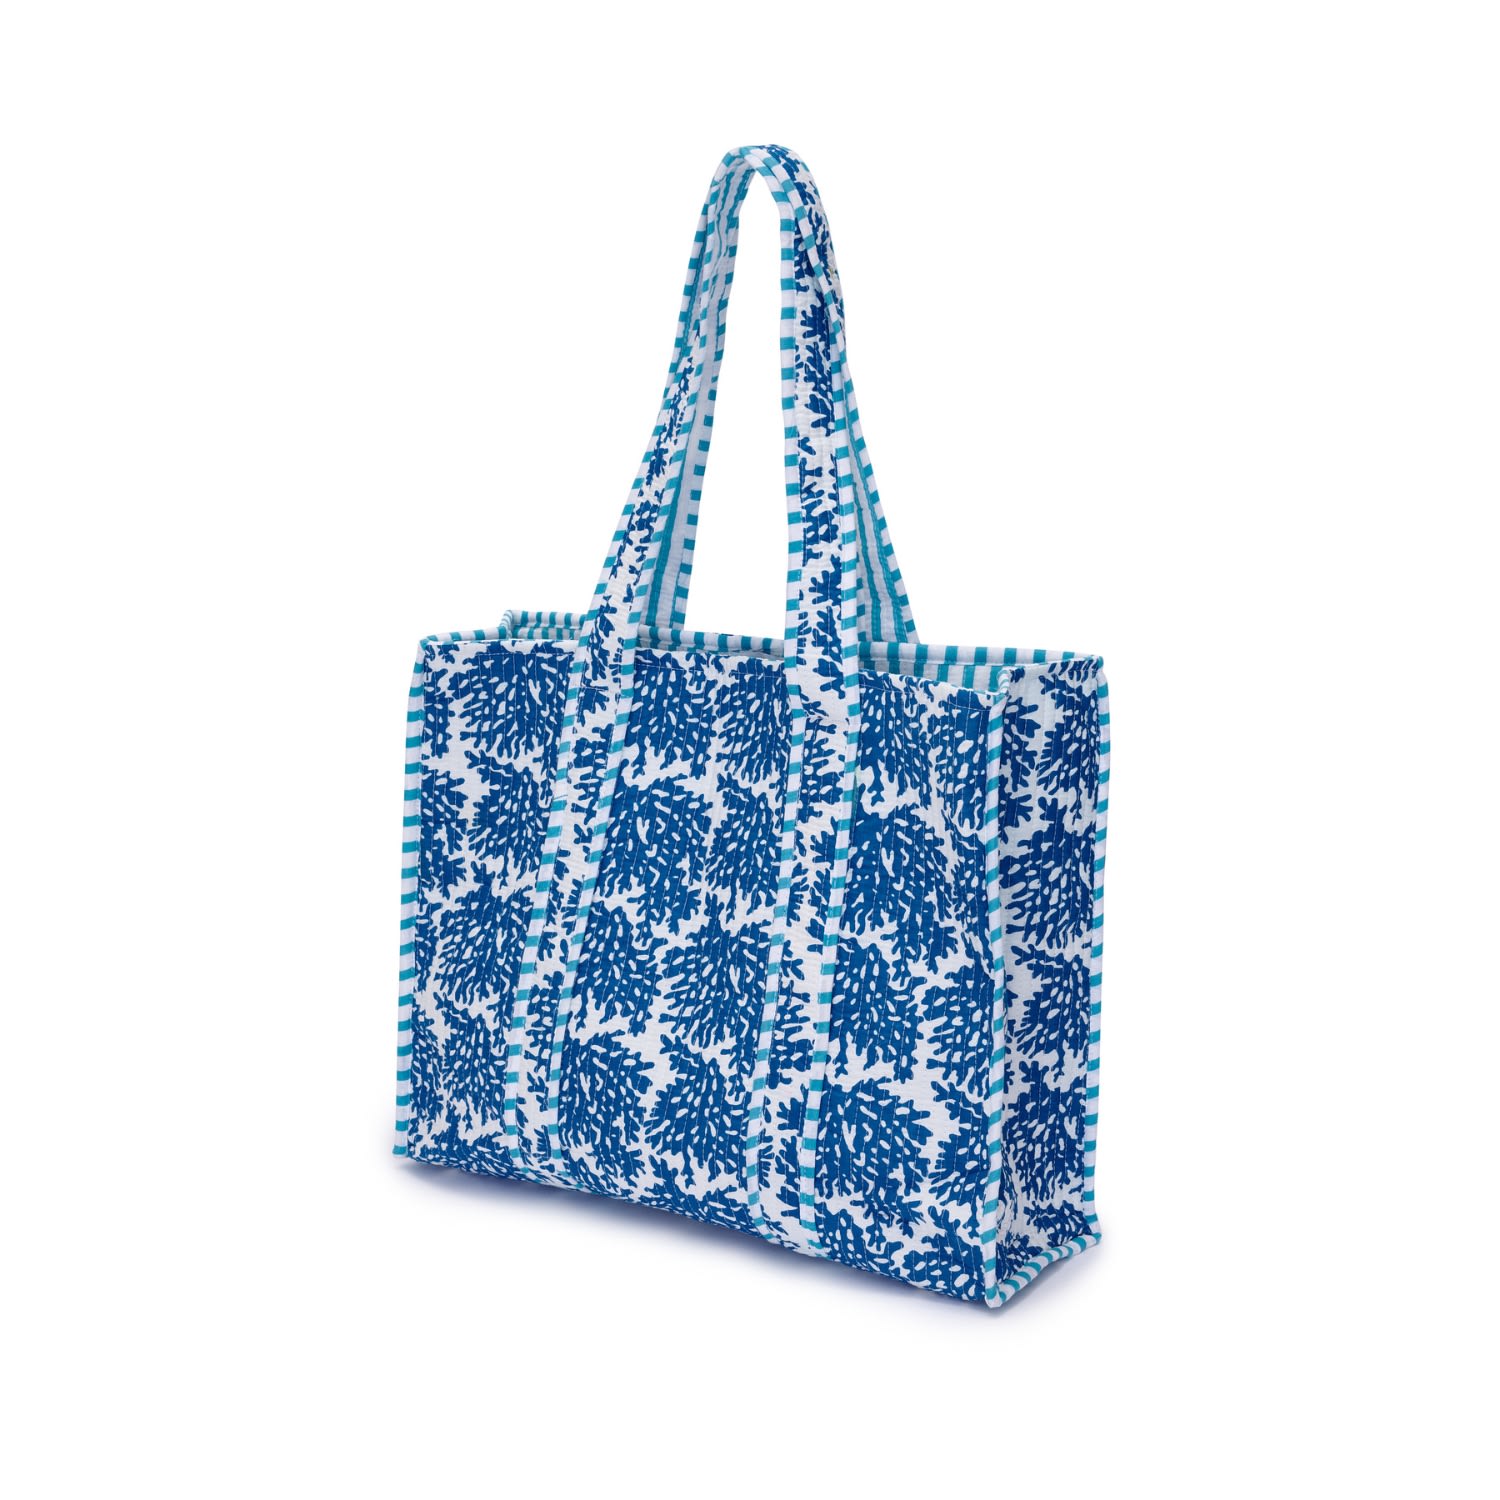 At Last... Women's Cotton Tote Bag In White With Blue Reef In Burgundy